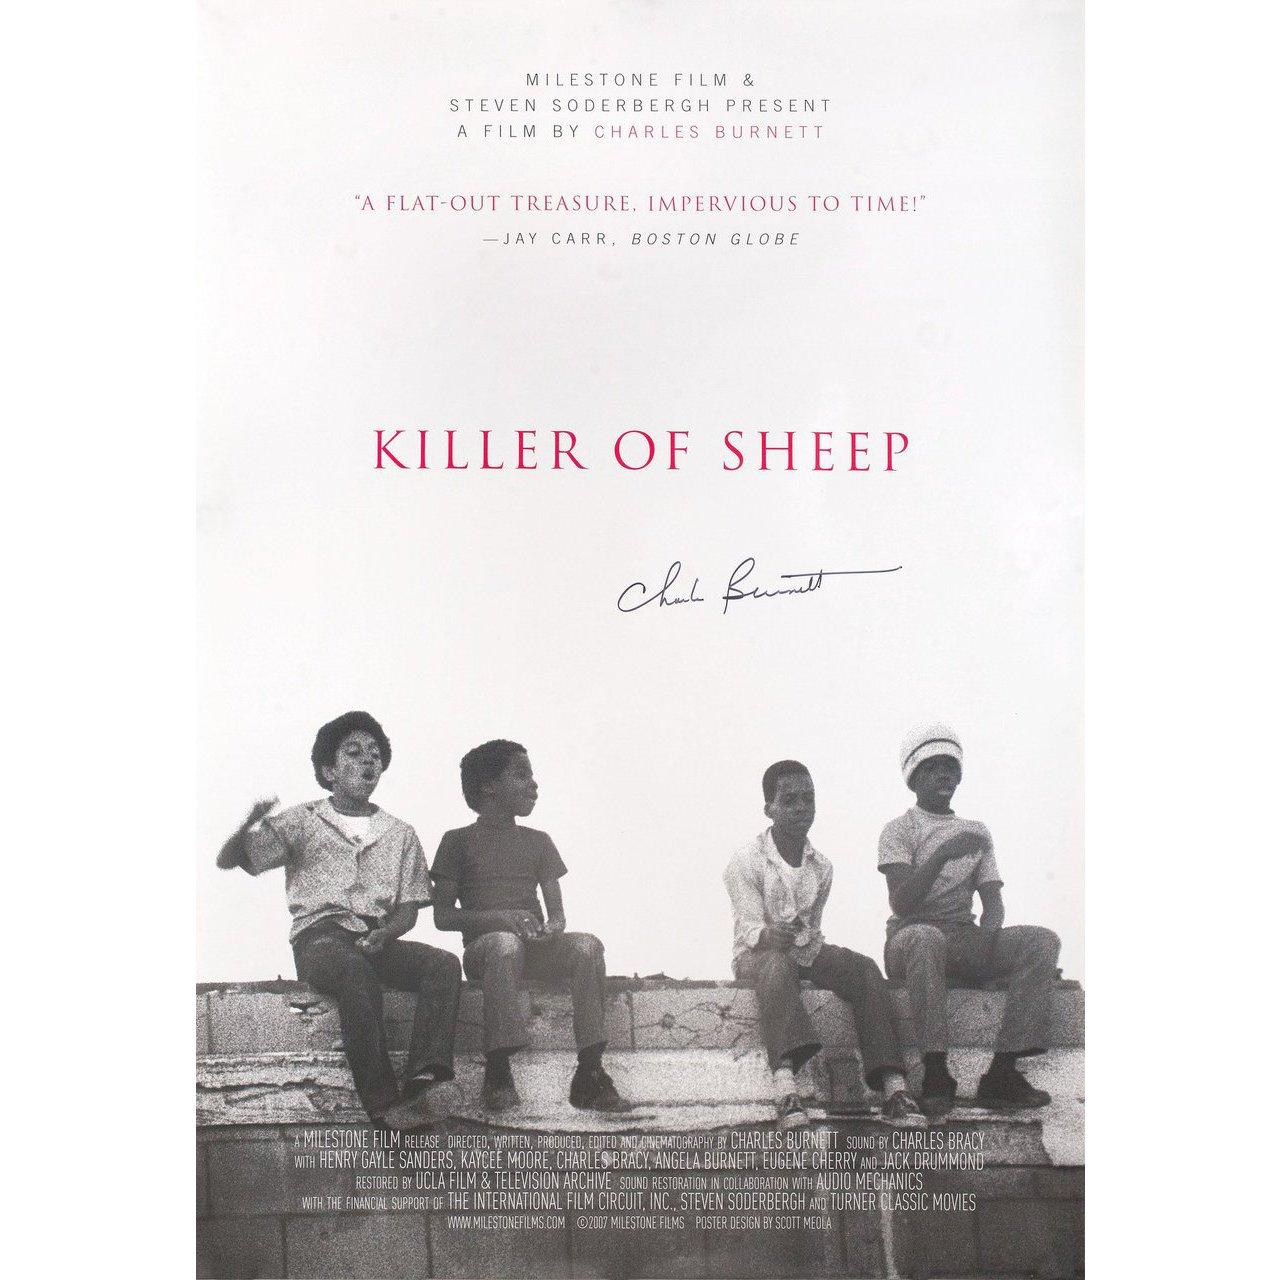 Original 2007 U.S. one sheet poster for the 1979 film “Killer of Sheep” directed by Charles Burnett with Henry G. Sanders / Kaycee Moore / Charles Bracy / Angela Burnett. Signed by Charles Burnett. Very good-fine condition, rolled. Please note: the